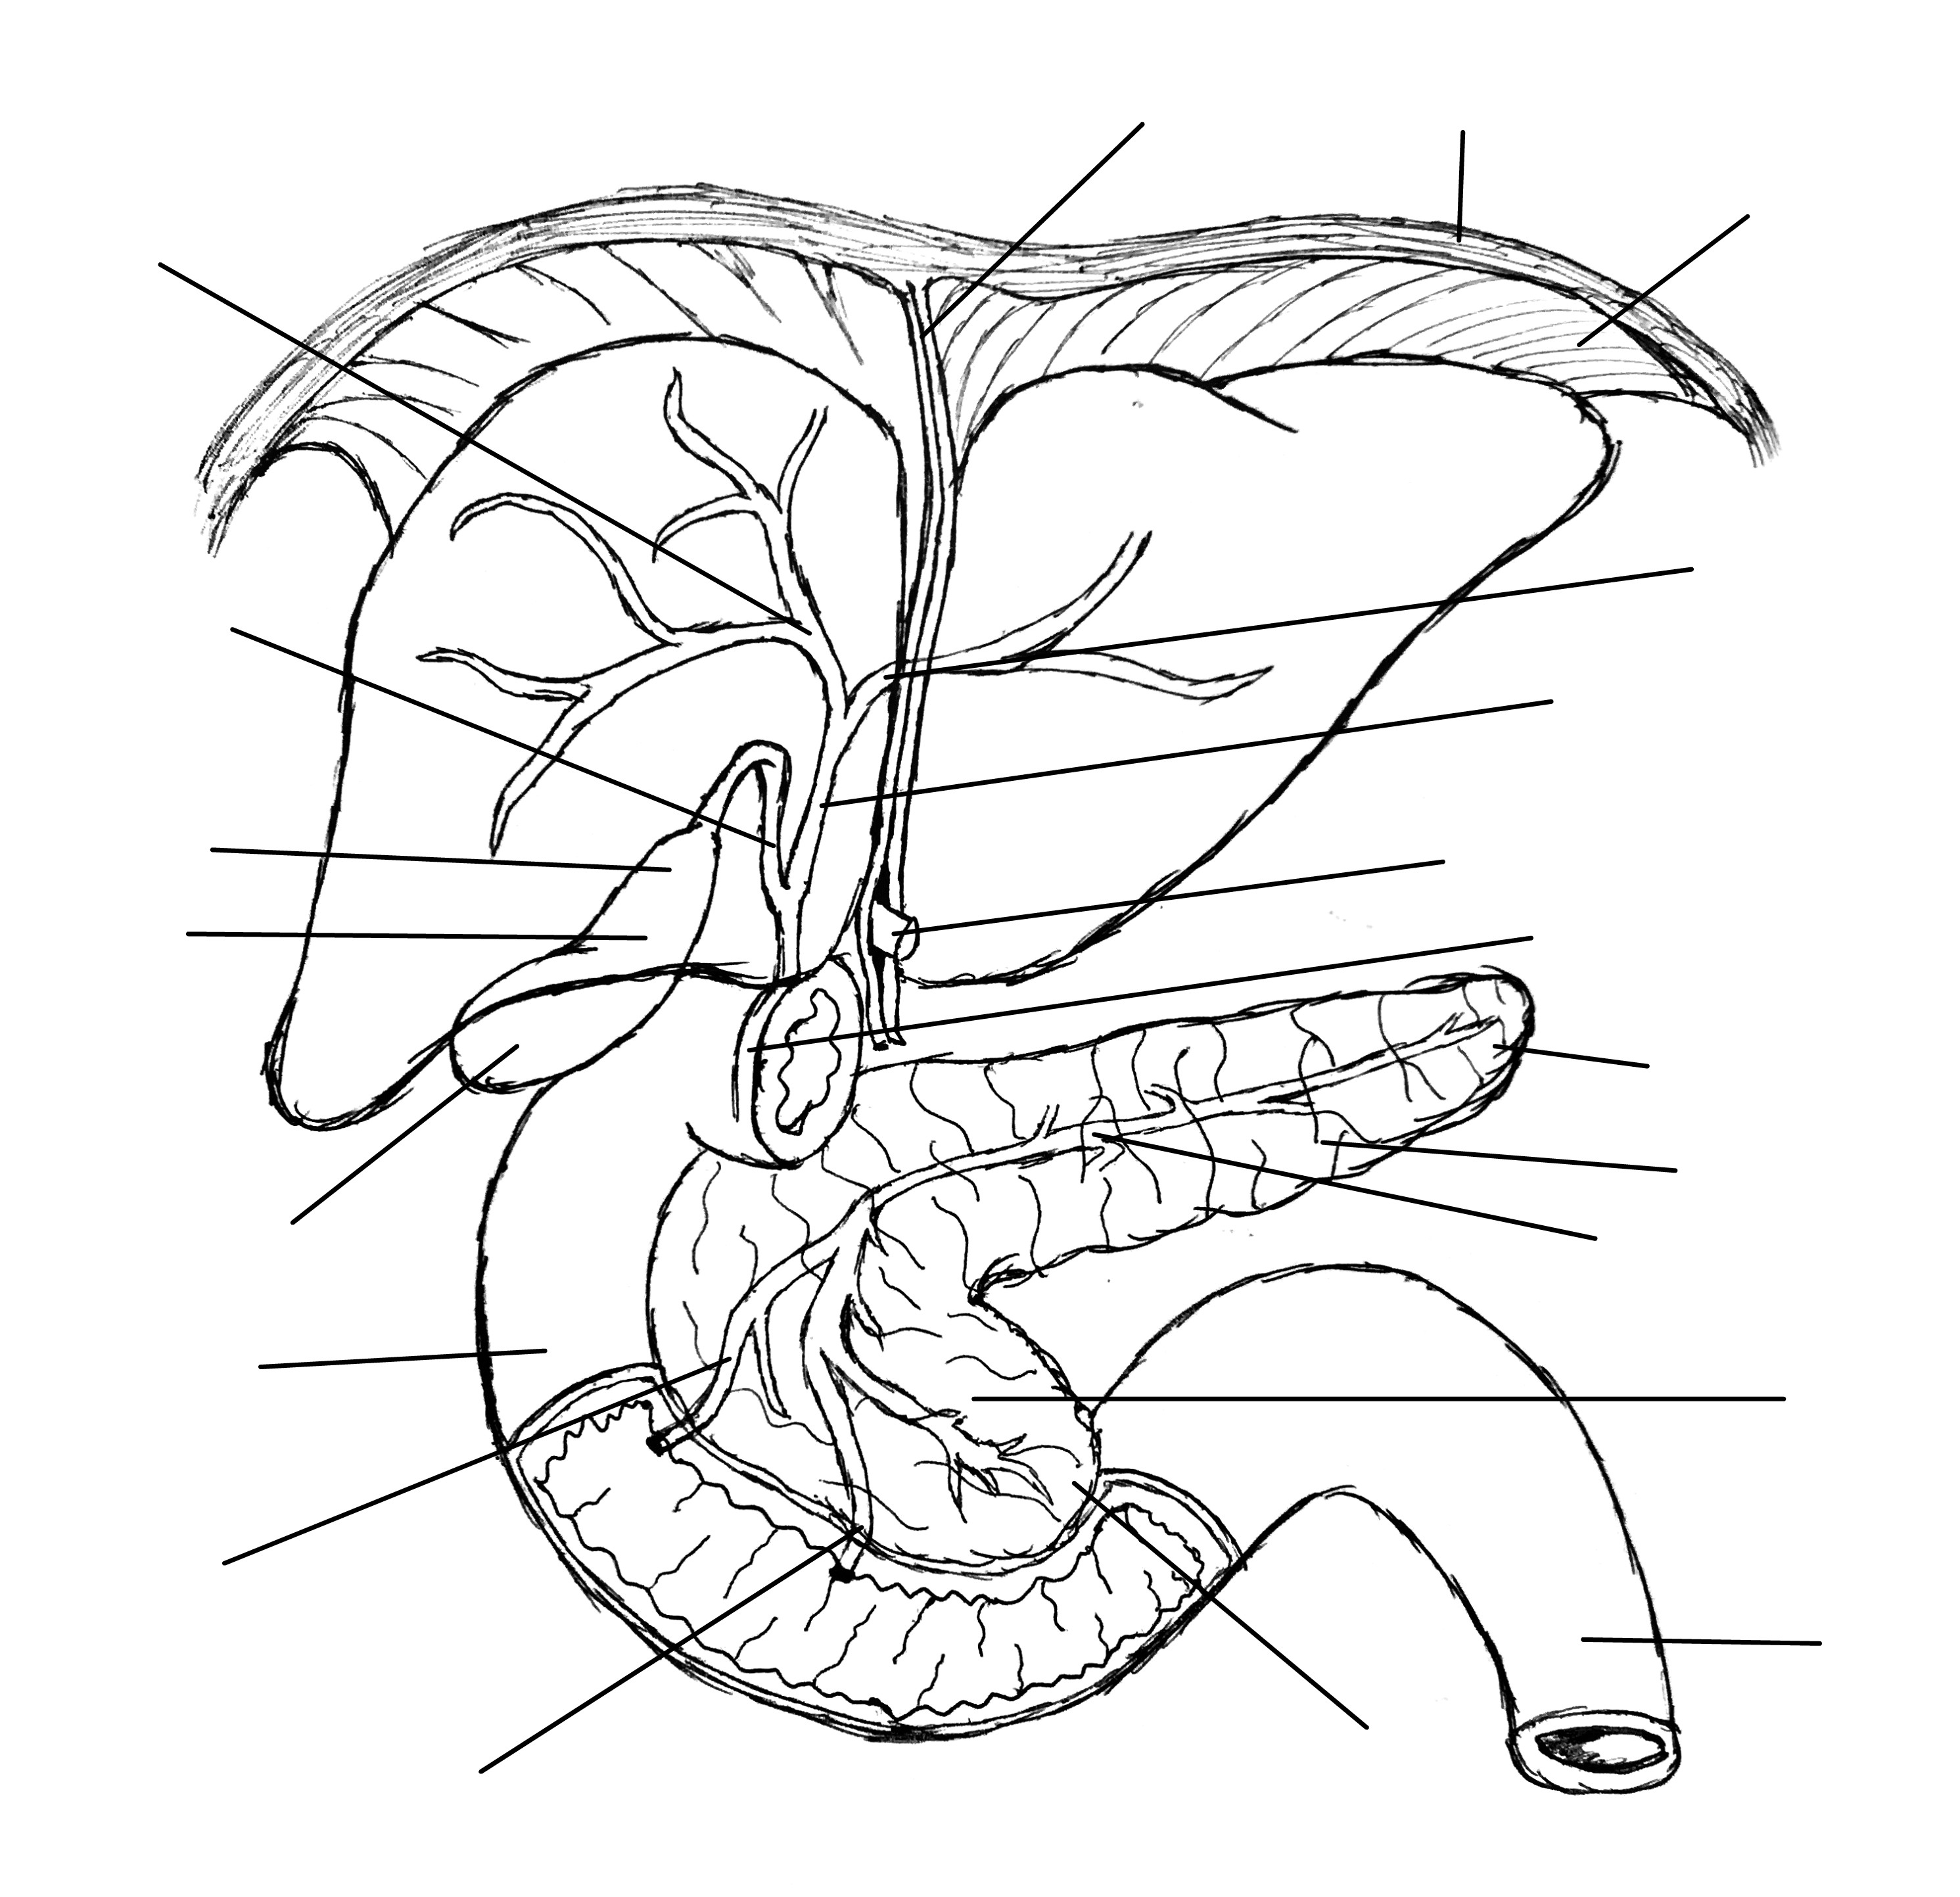 Predefined space to Label the accessory organs, structures, and ducts of the digestive system